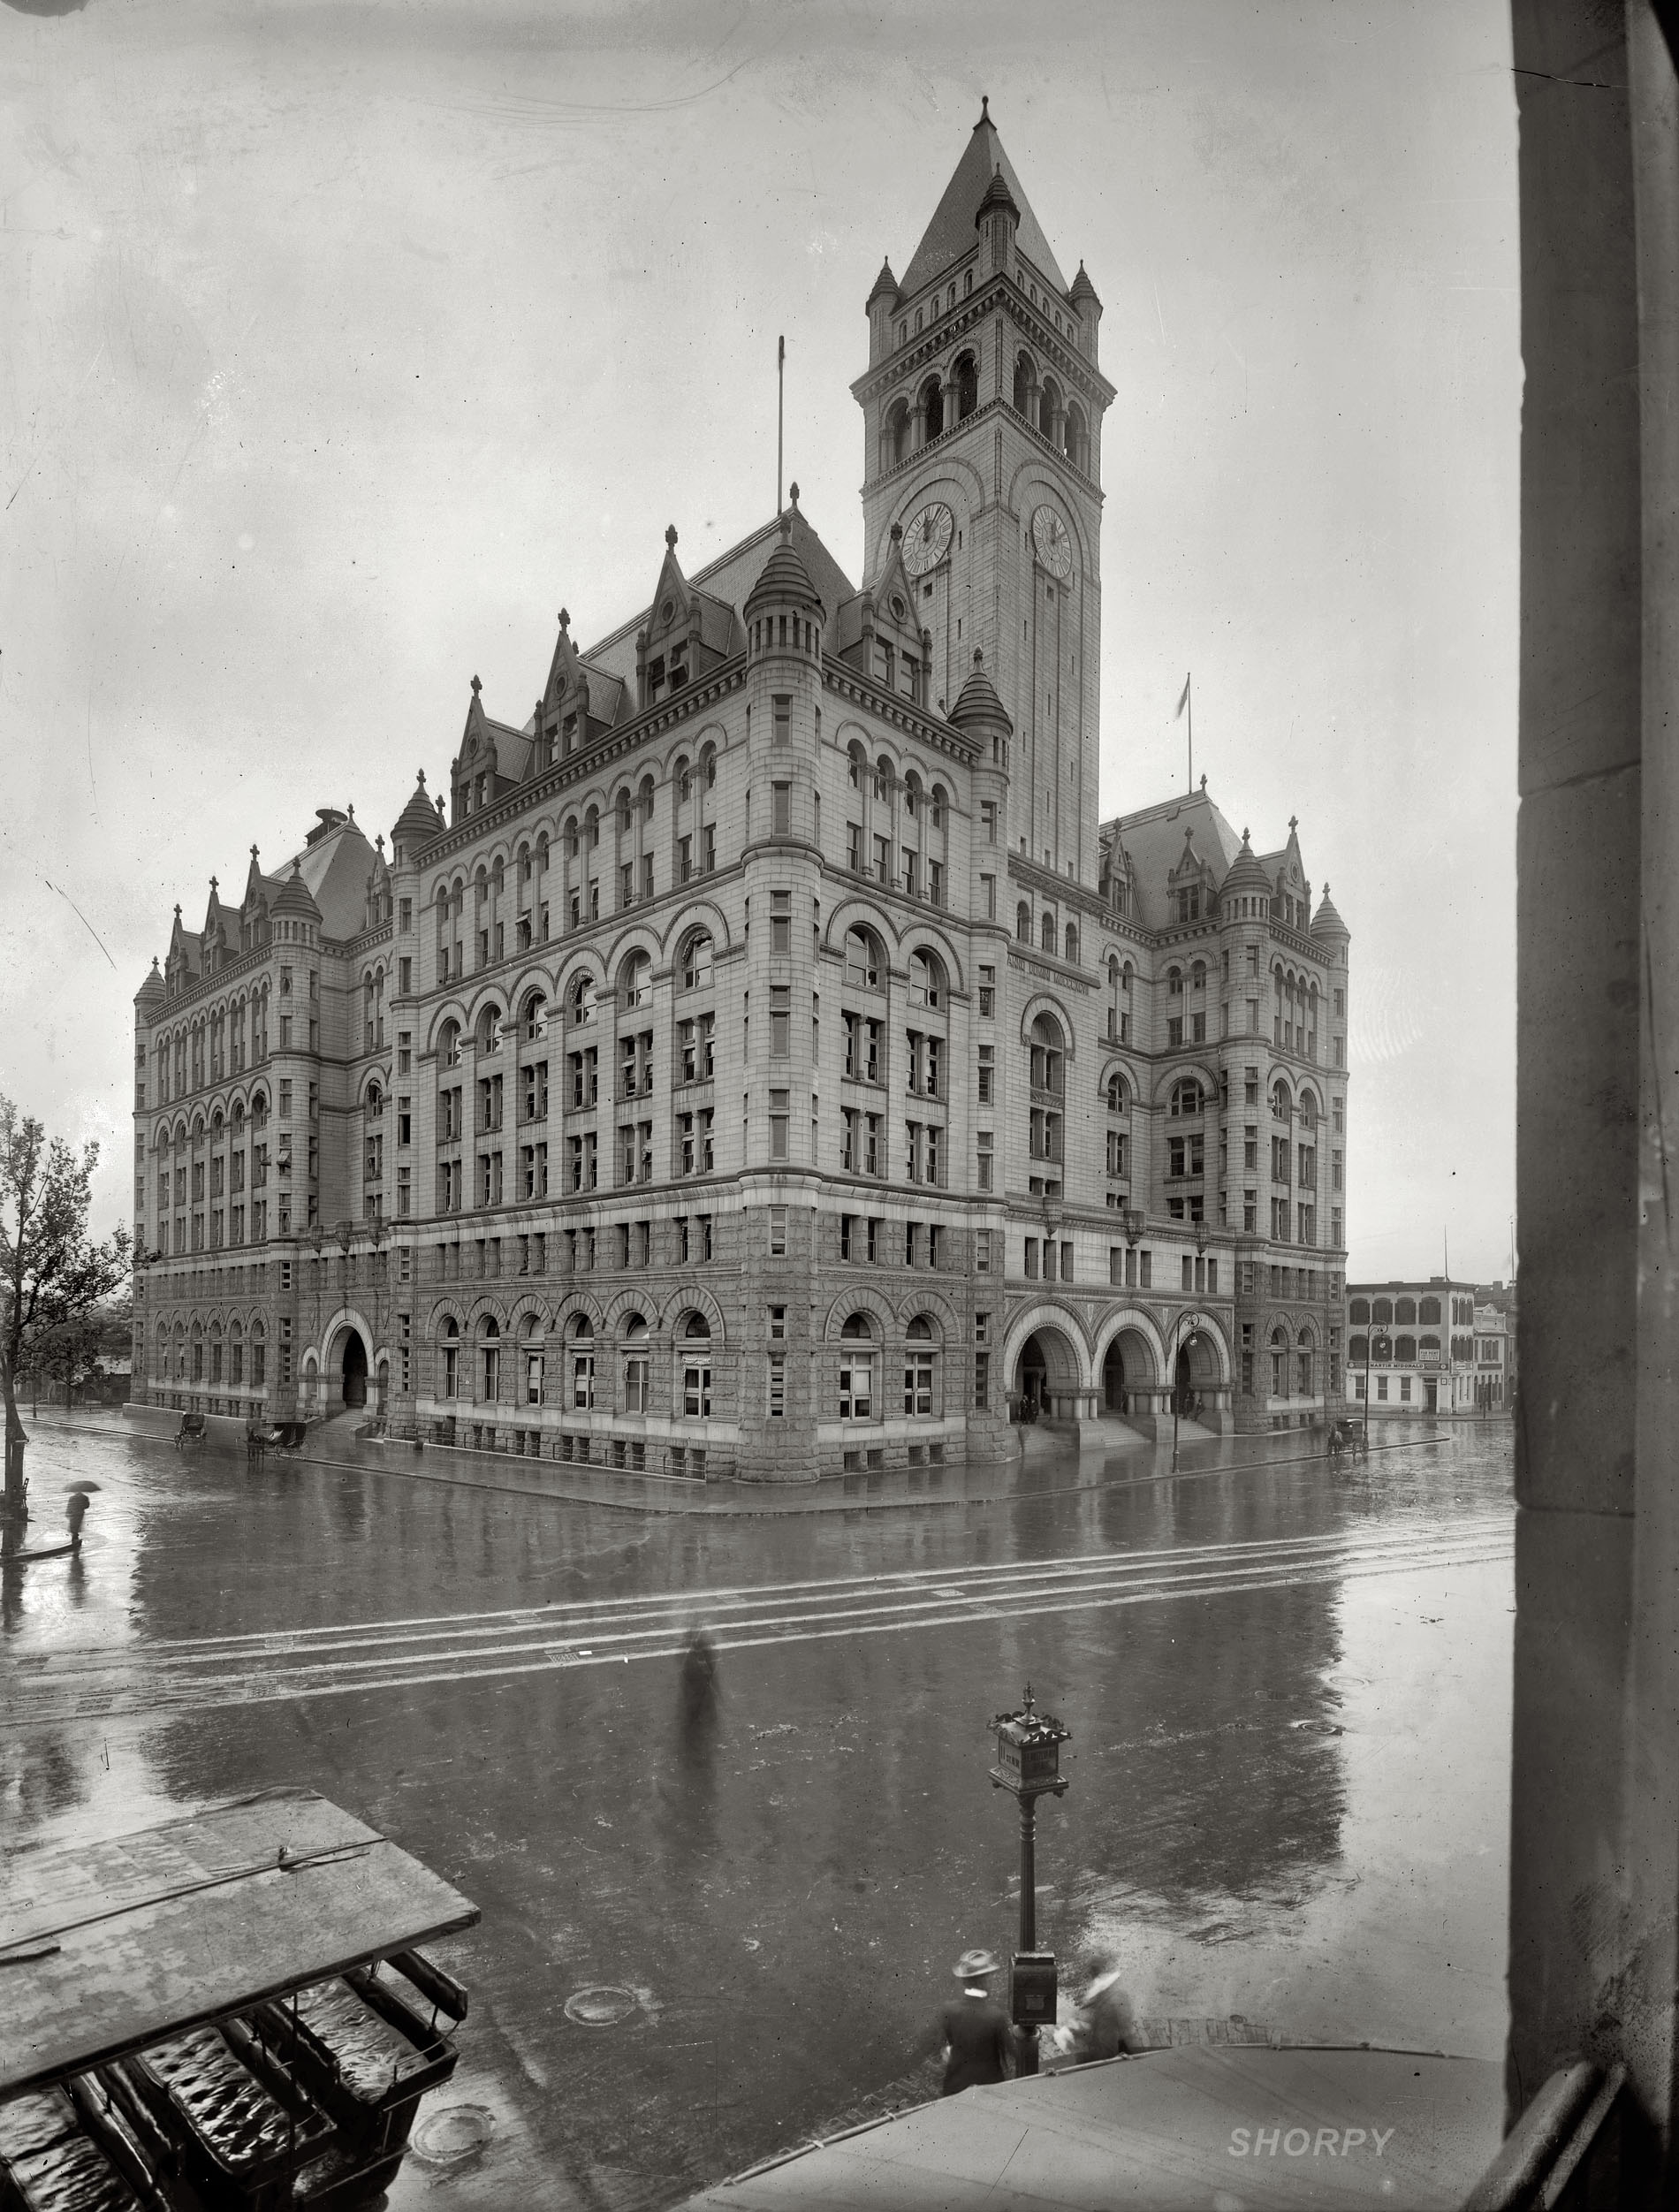 "Post Office Department, Washington," circa 1908. The Old Post Office building seen from the corner of 11th Street and Pennsylvania Avenue N.W. on a rainy day. George Grantham Bain Collection glass negative. View full size.